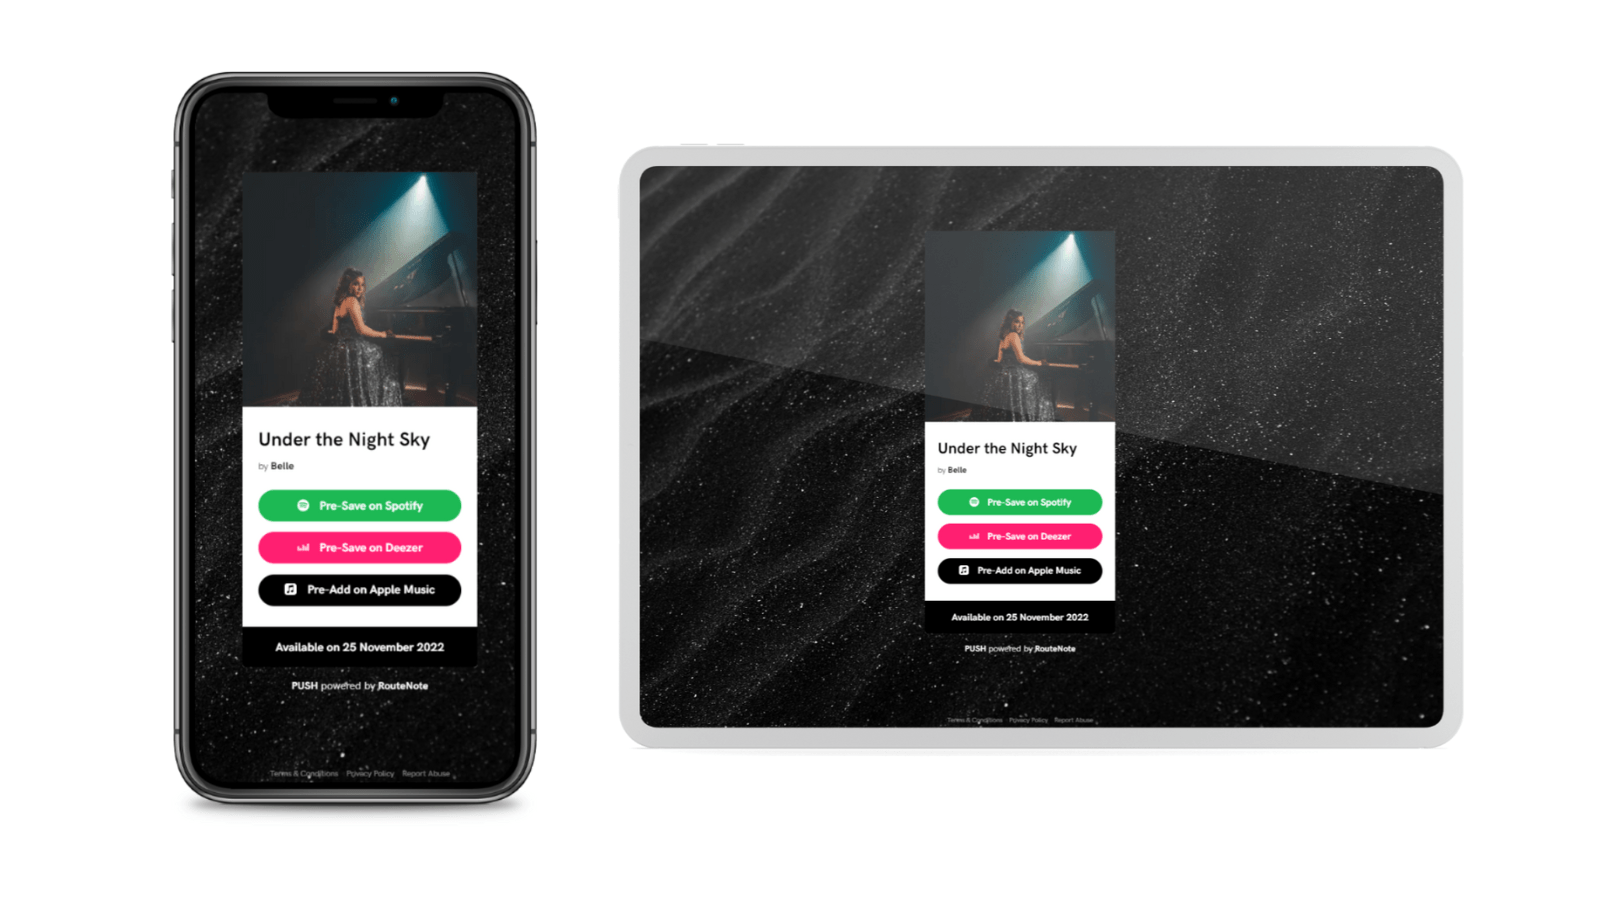 Pre-save example with custom background shown on both a smartphone and a tablet.